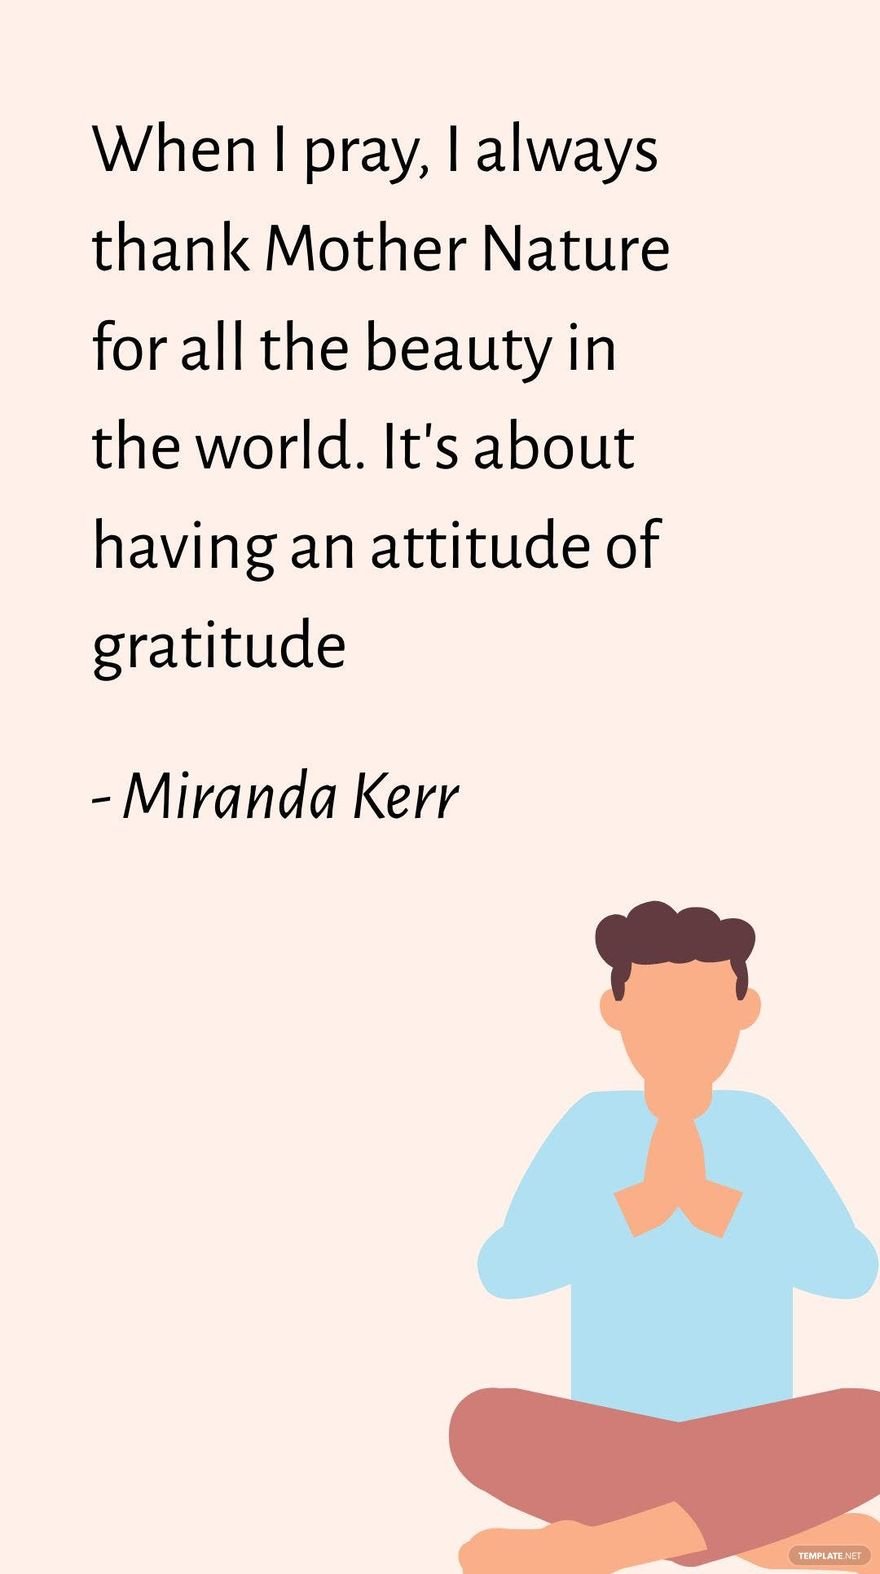 Miranda Kerr - When I pray, I always thank Mother Nature for all the beauty in the world. It's about having an attitude of gratitude